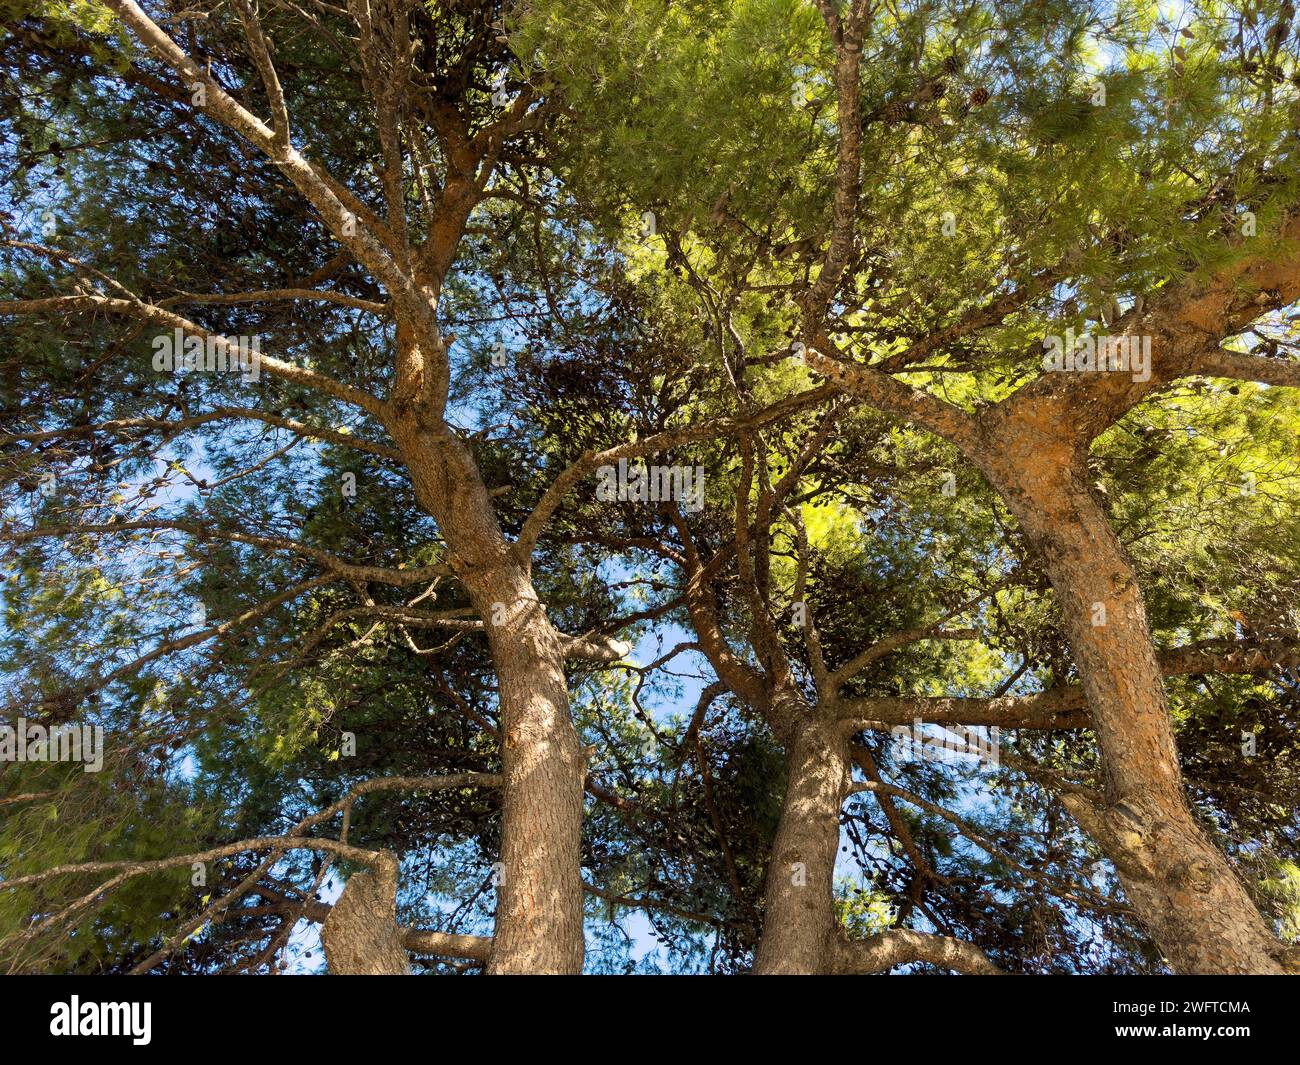 Pine treetop, tree with rough bark lush foliage and cone. Coniferous evergreen tall fir with needle, sunlight, blue sky, under view. Stock Photo